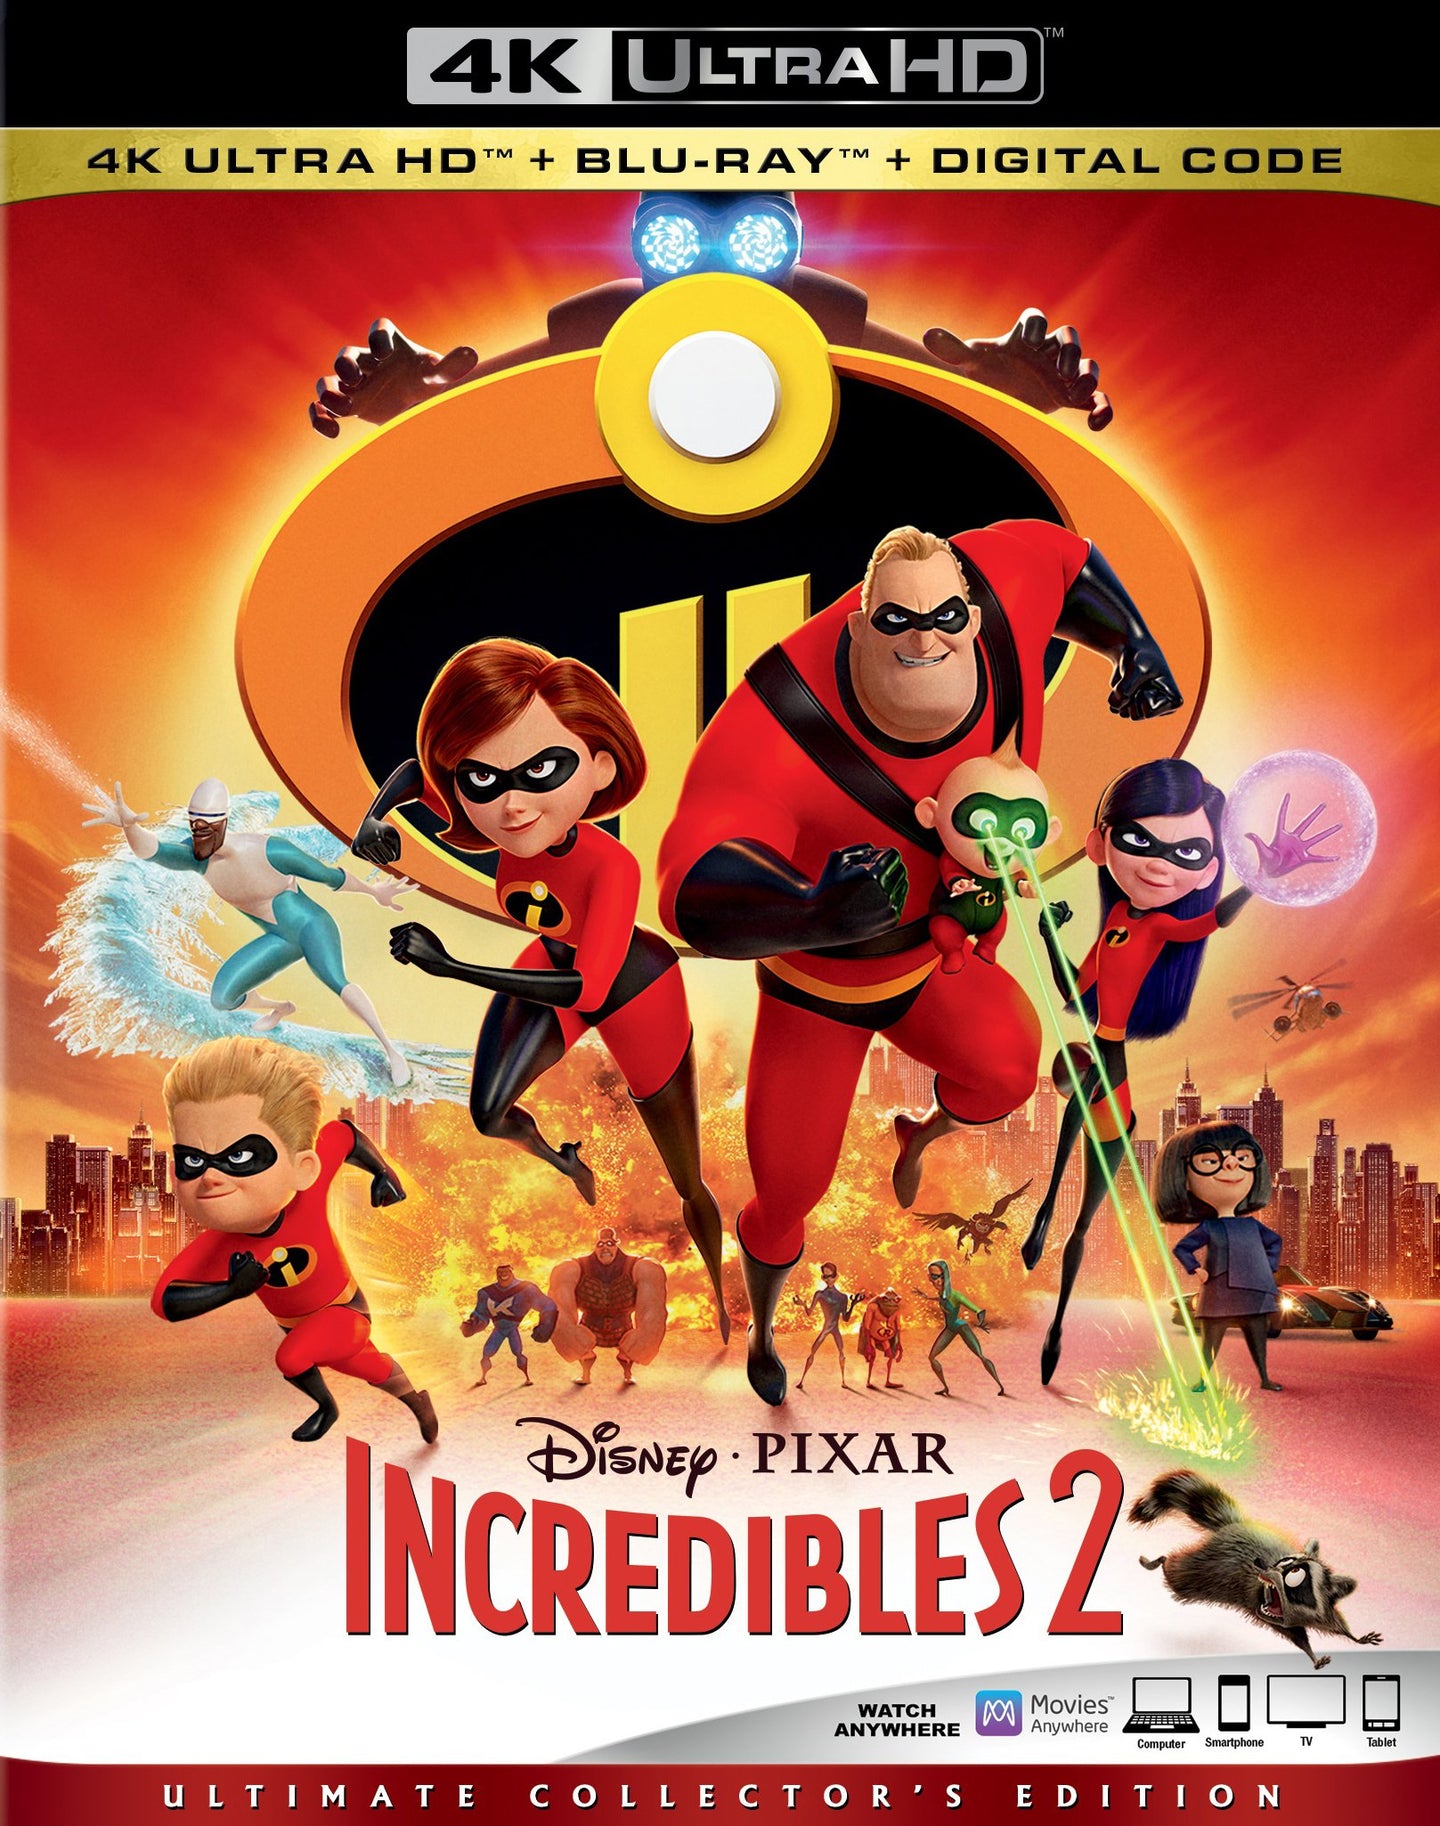 Incredibles 2 (2018) Vudu or Movies Anywhere 4K redemption only